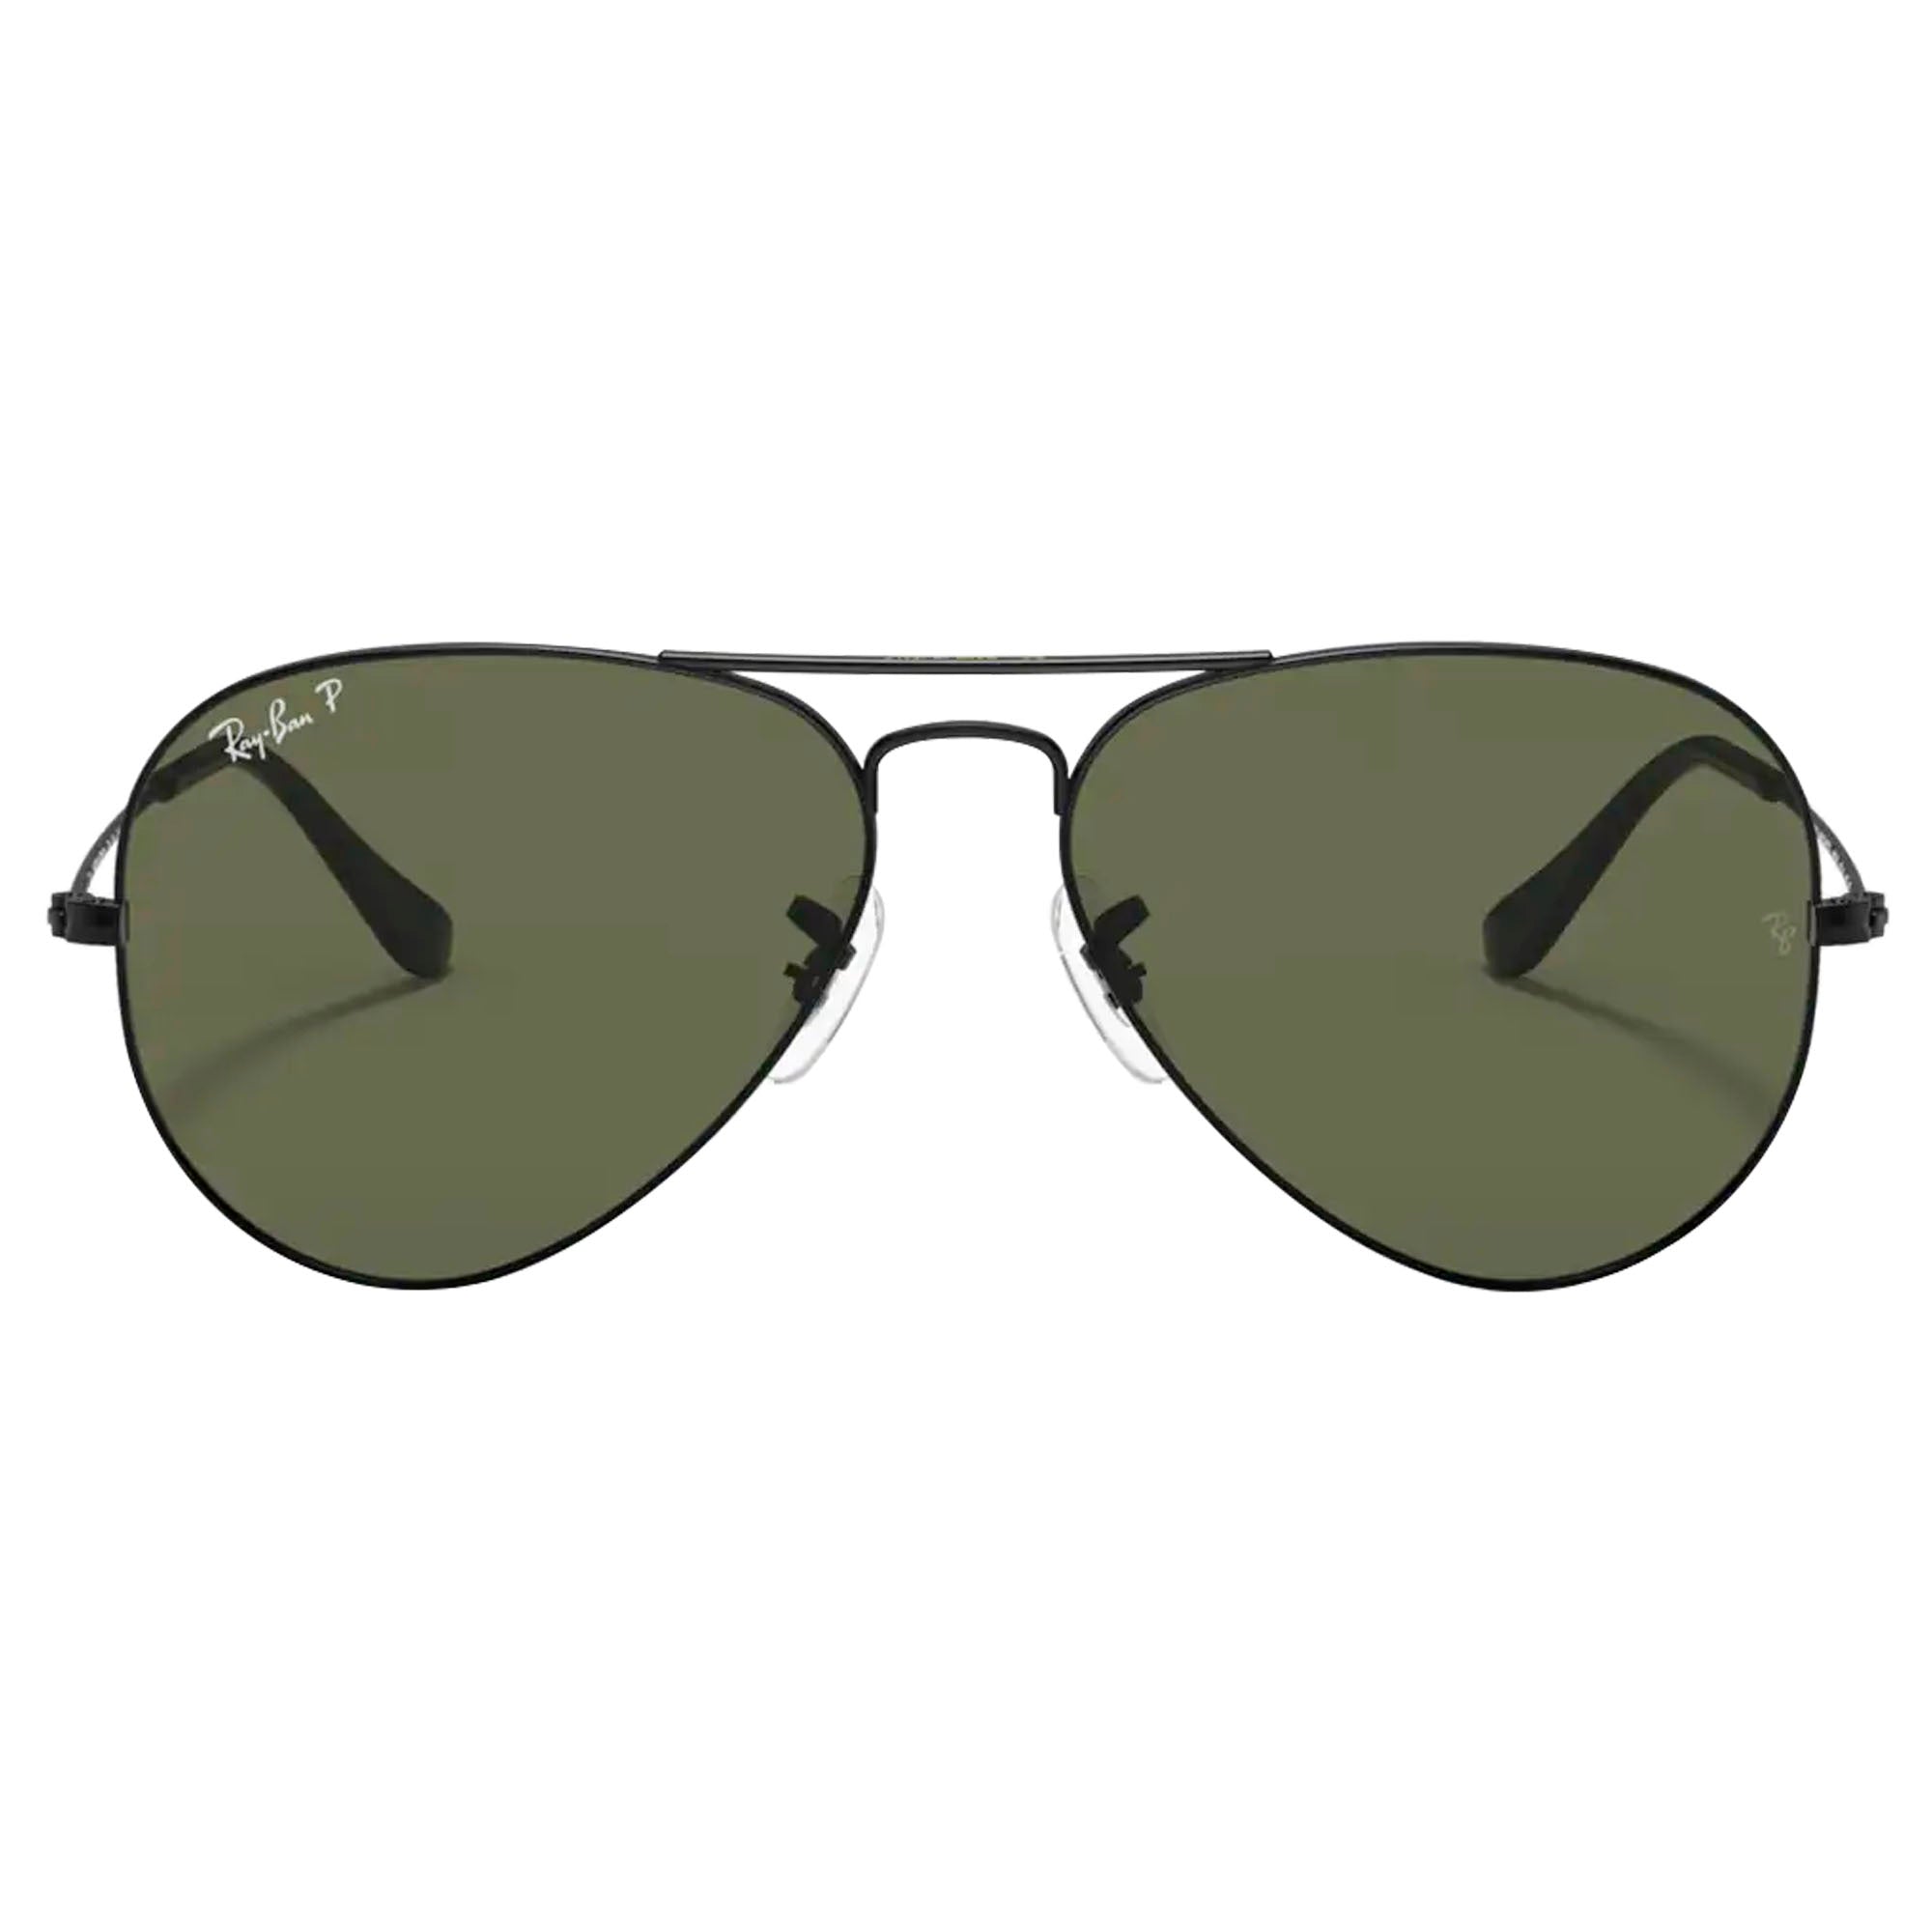 Ray-Ban RB3025-002/58 Polished Black Frame w/ Green Solid Len